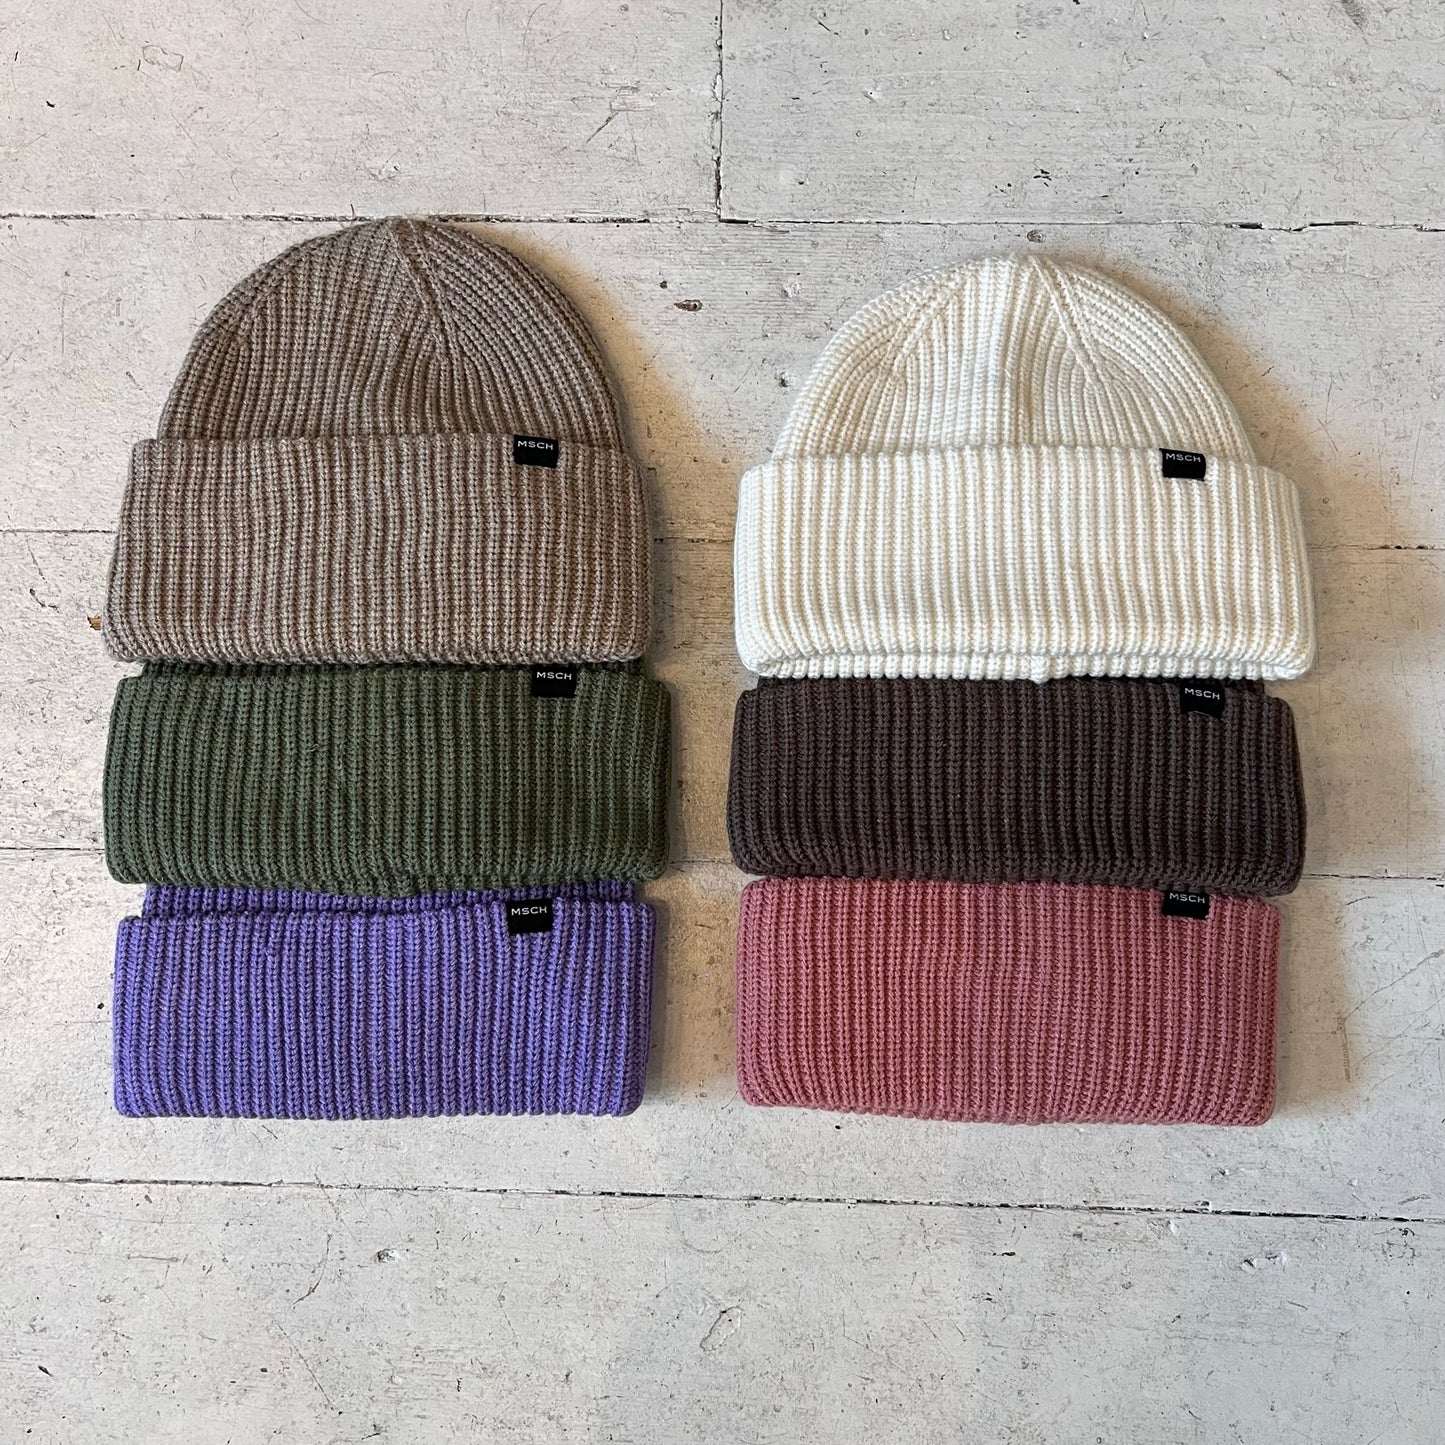 MSCH Ribbed Beanie - Various Colours